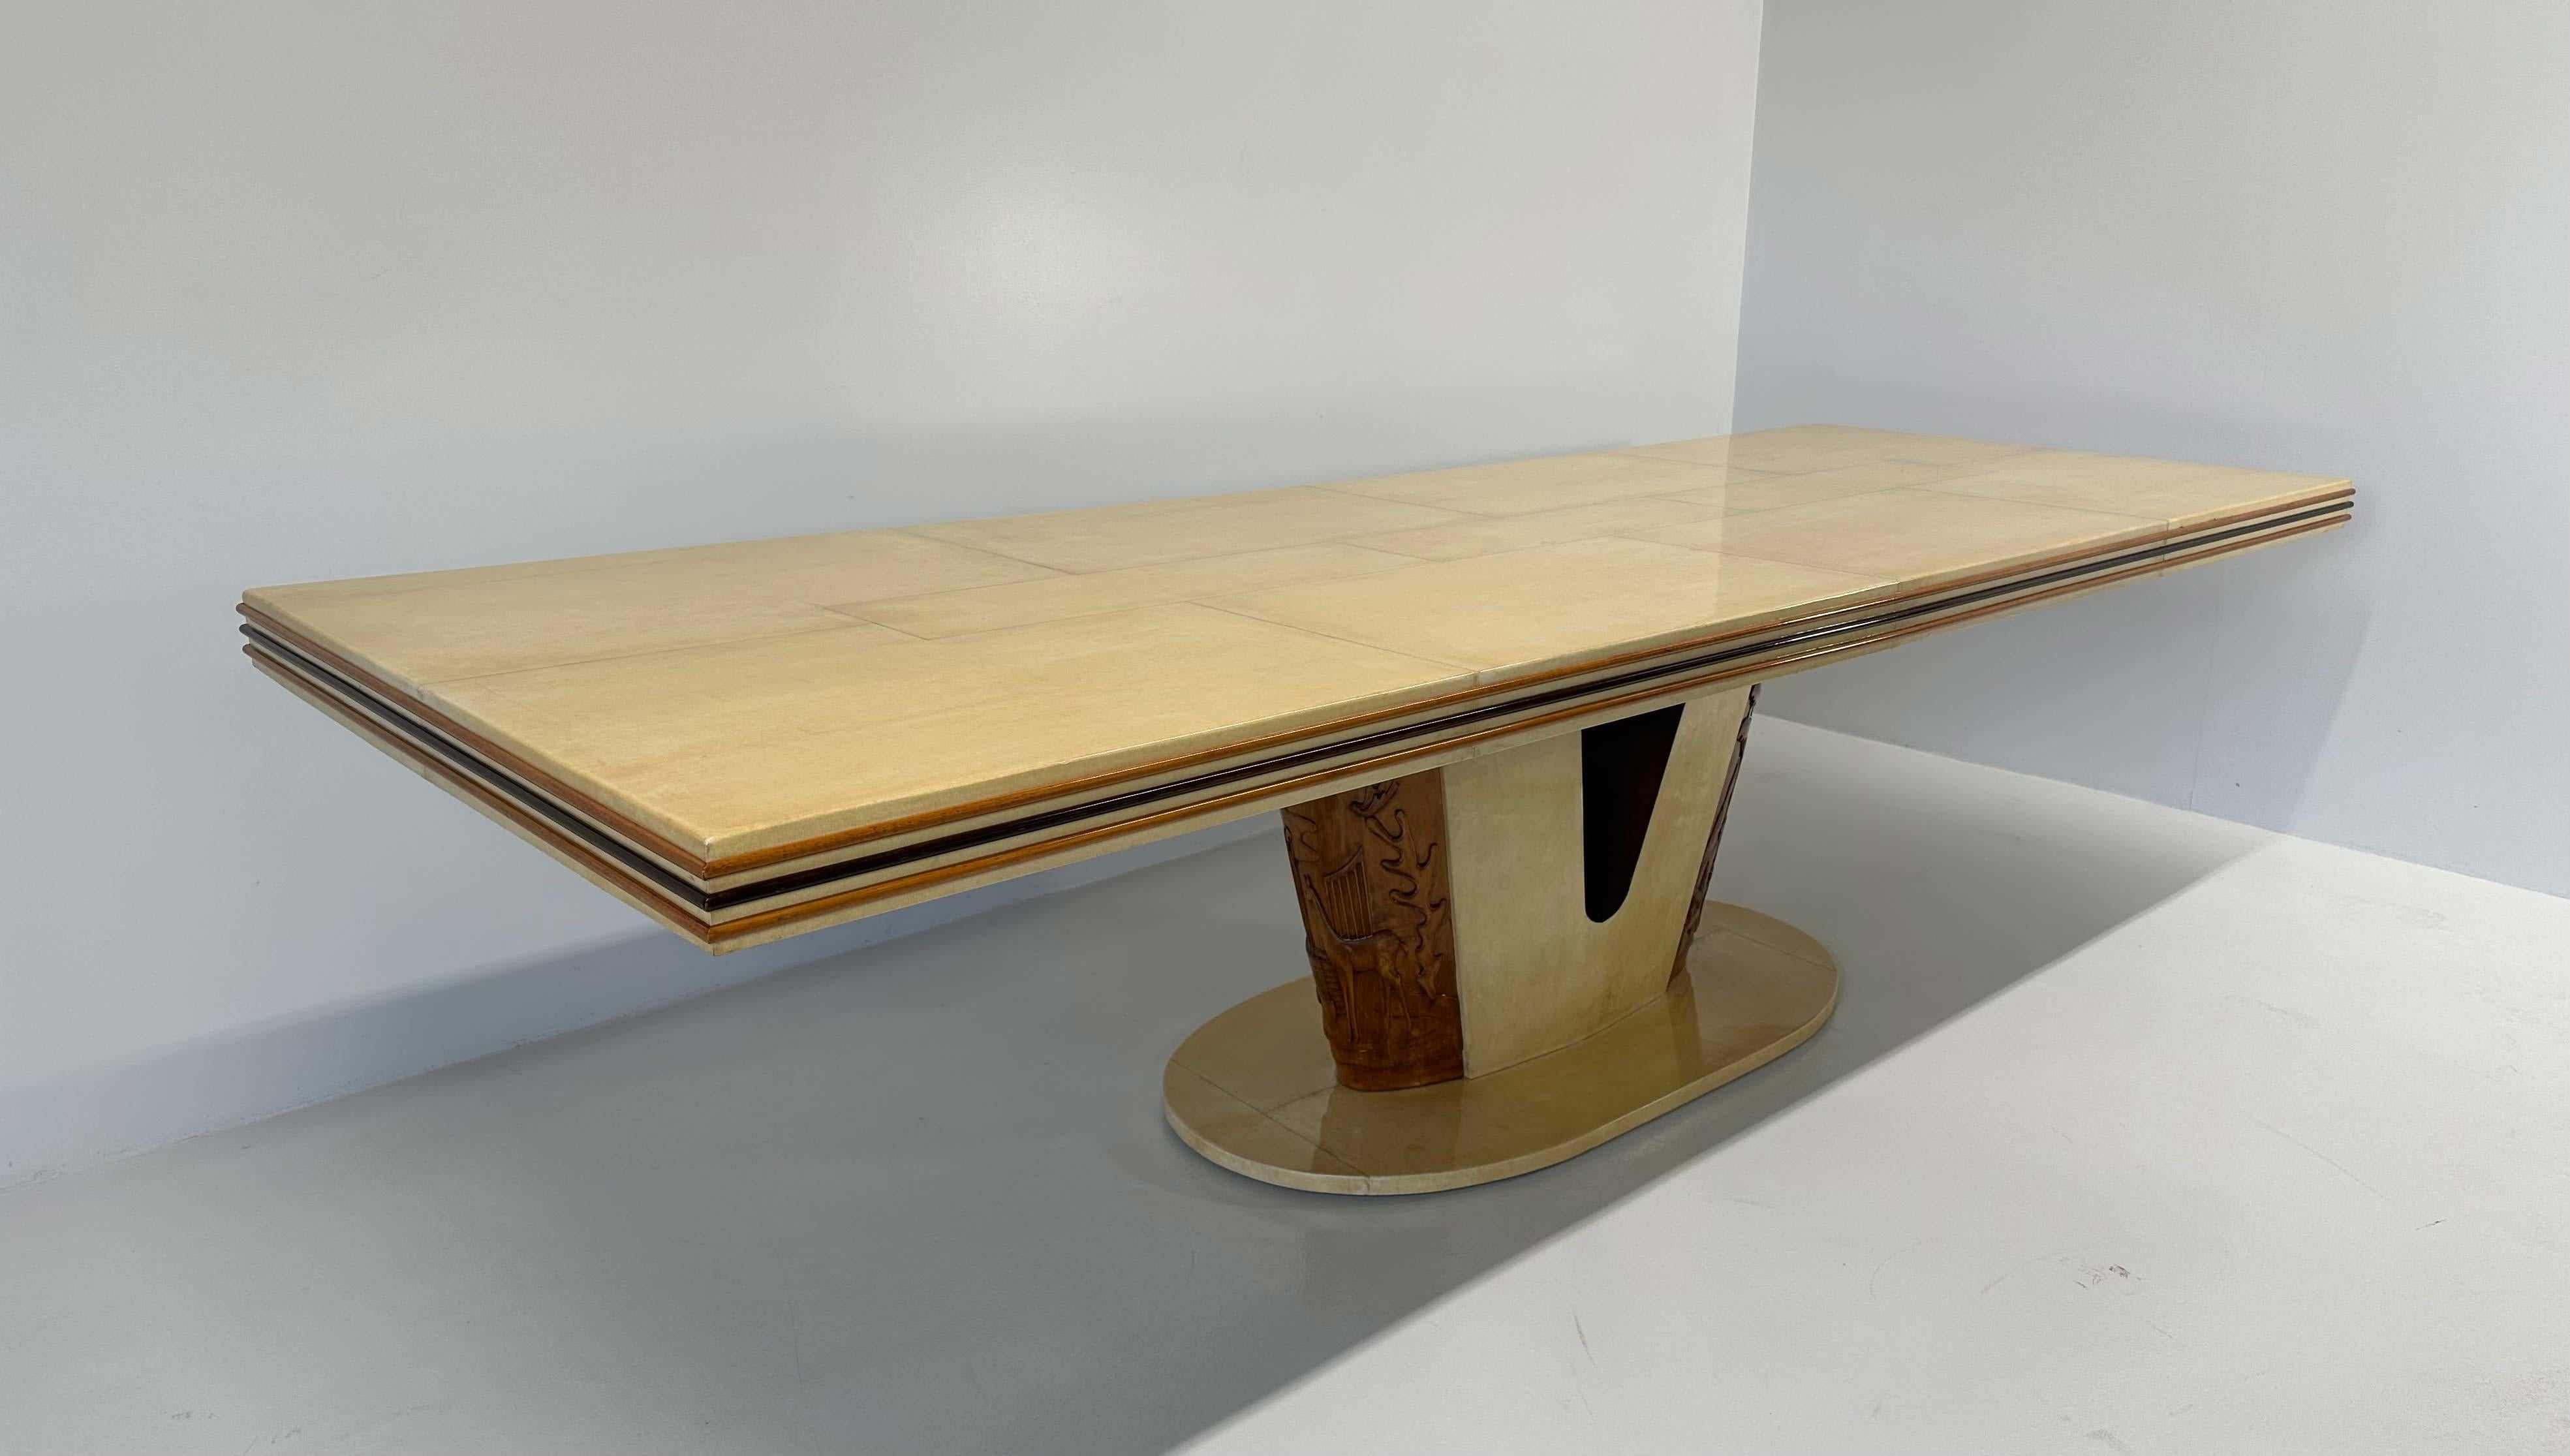 Italian Art Deco Parchment and Carved Maple Table, 1930s For Sale 1